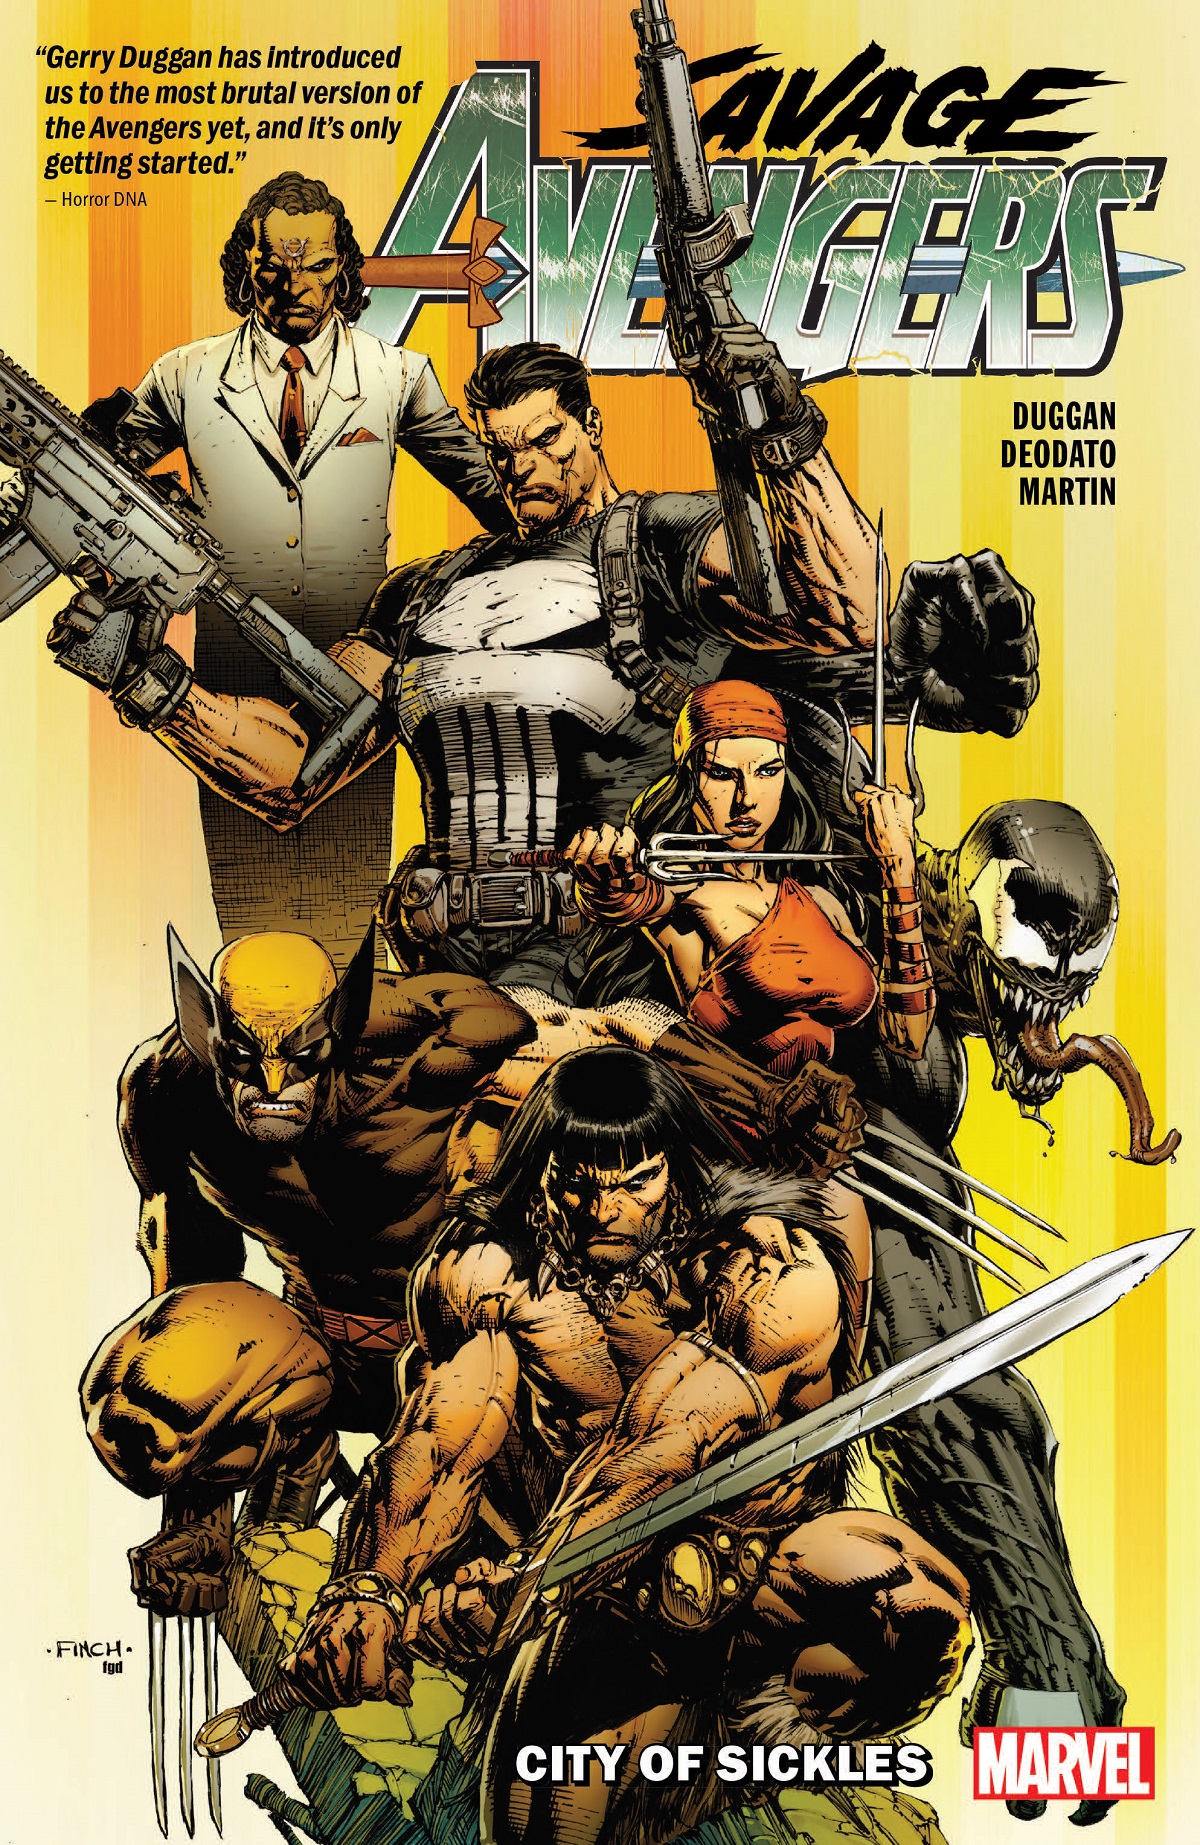 Savage Avengers Vol. 1: City Of Sickles (Trade Paperback)